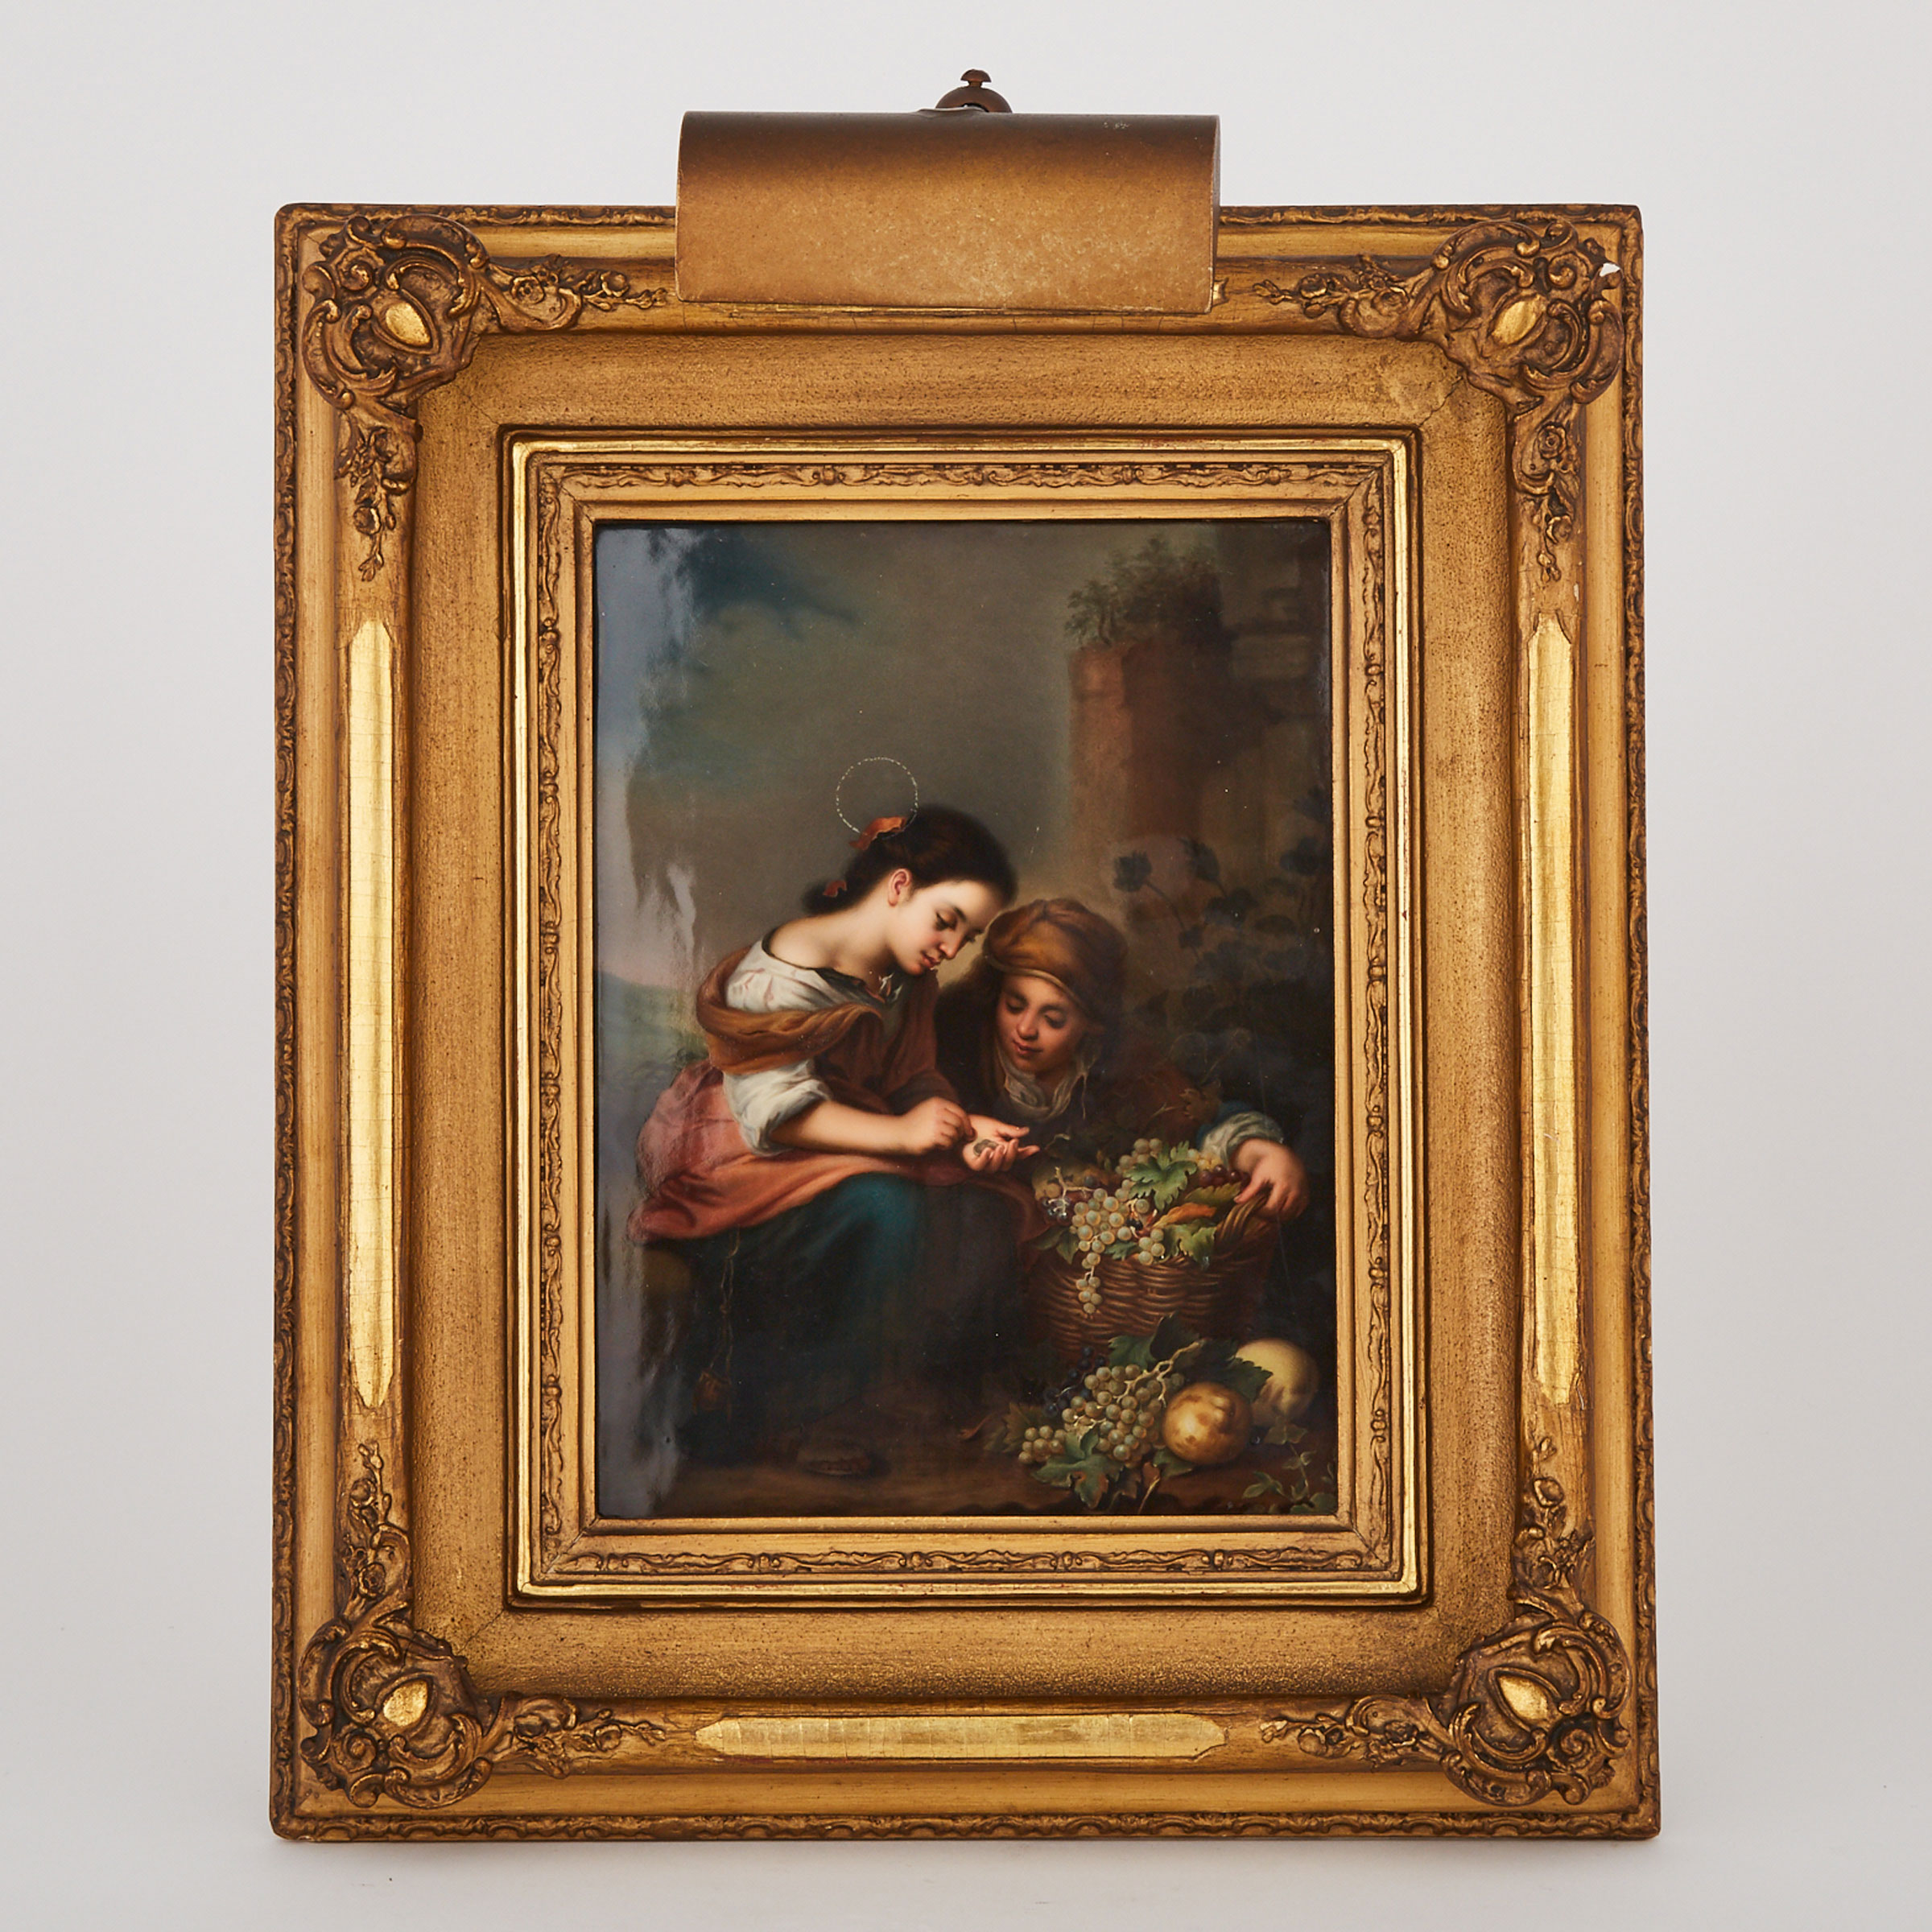 Berlin Rectangular Plaque, ‘The Little Fruit Seller’, after Murillo, late 19th century